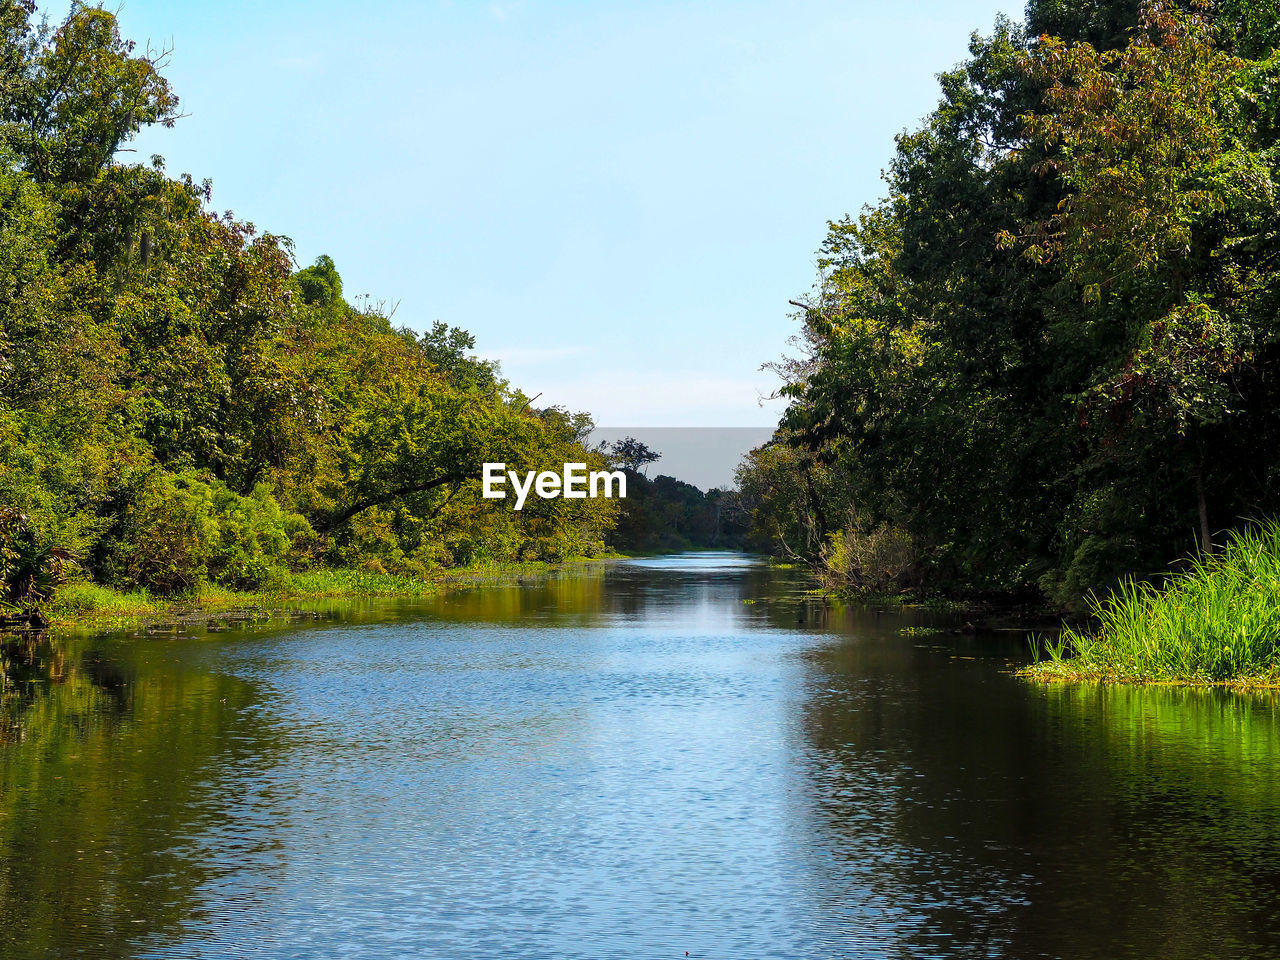 SCENIC VIEW OF RIVER AMIDST TREES IN FOREST